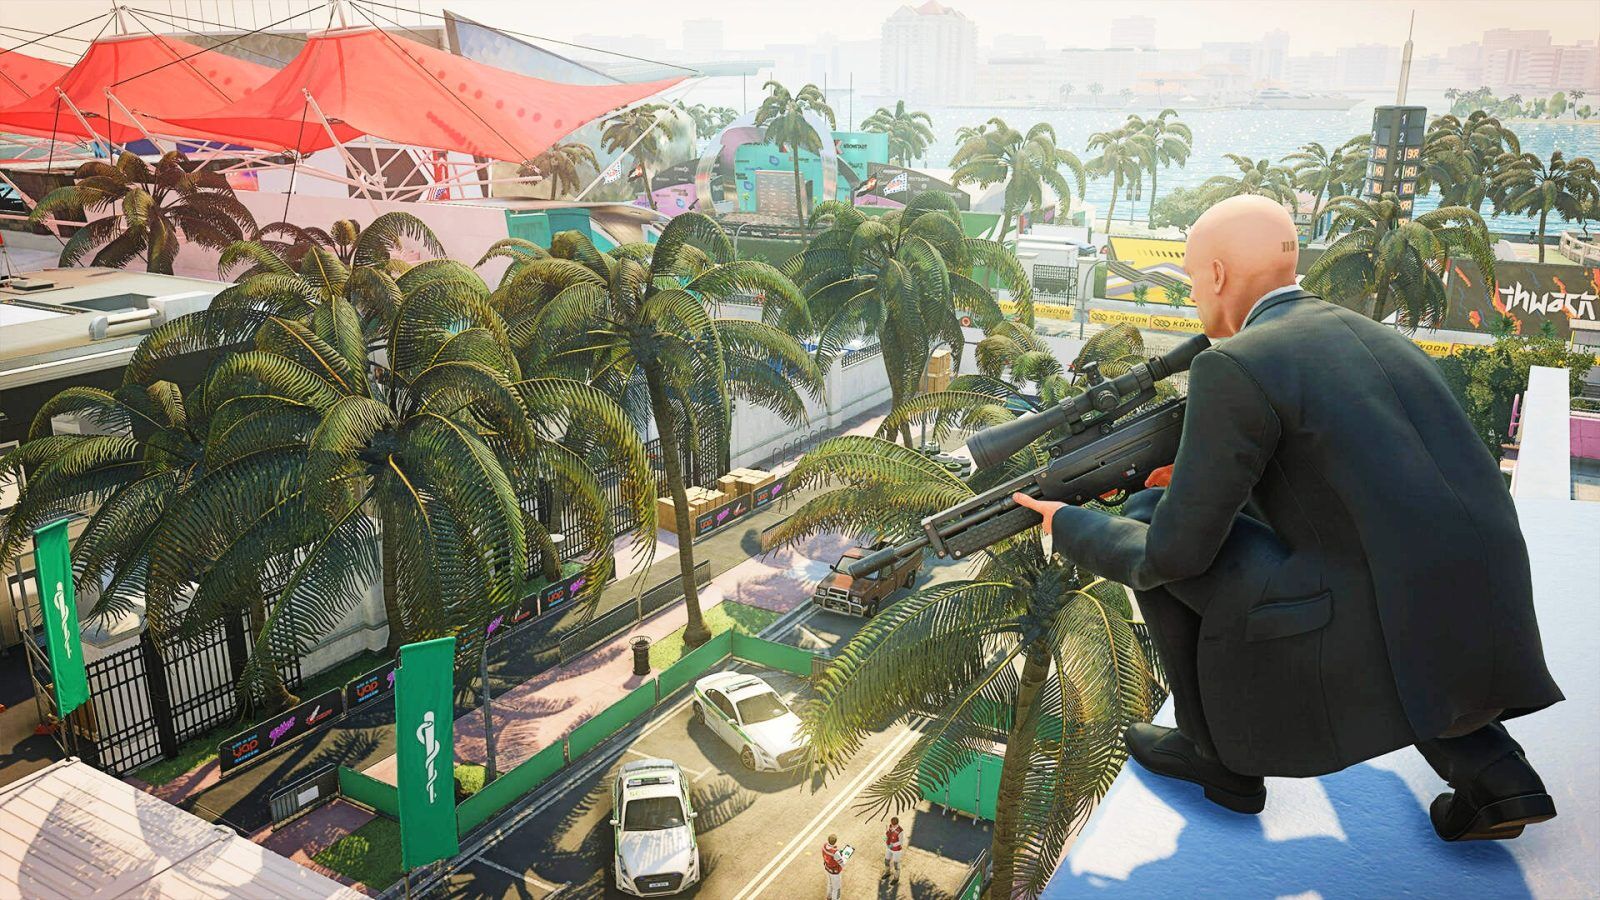 Hitman Agent 47 crouching on a roof overlooking a street circuit.